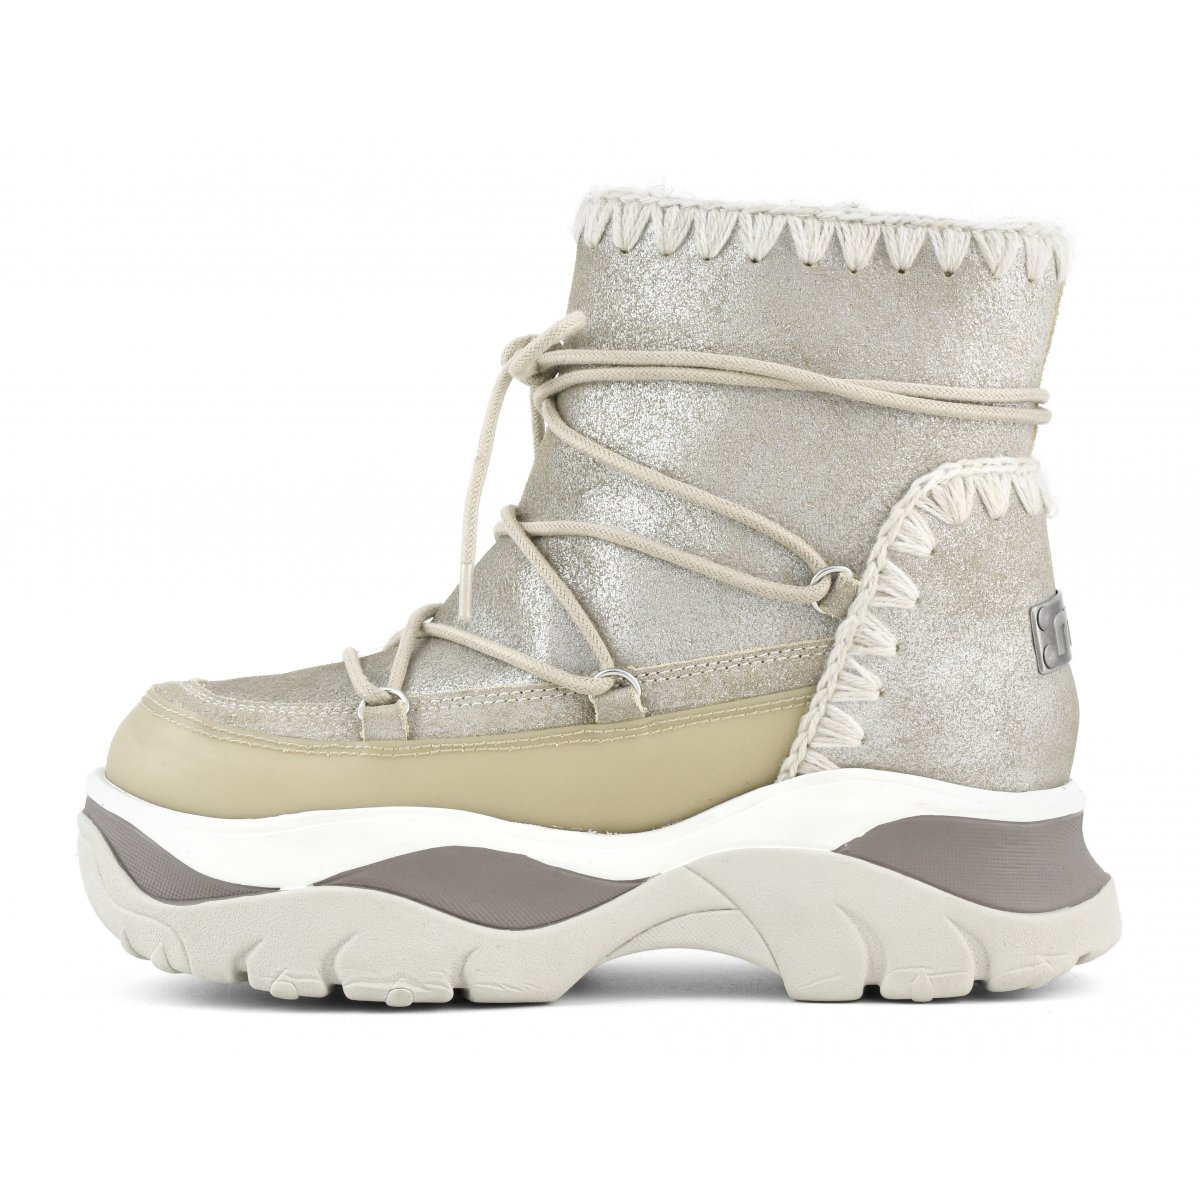 Chunky sneaker lace up boot STME img 5